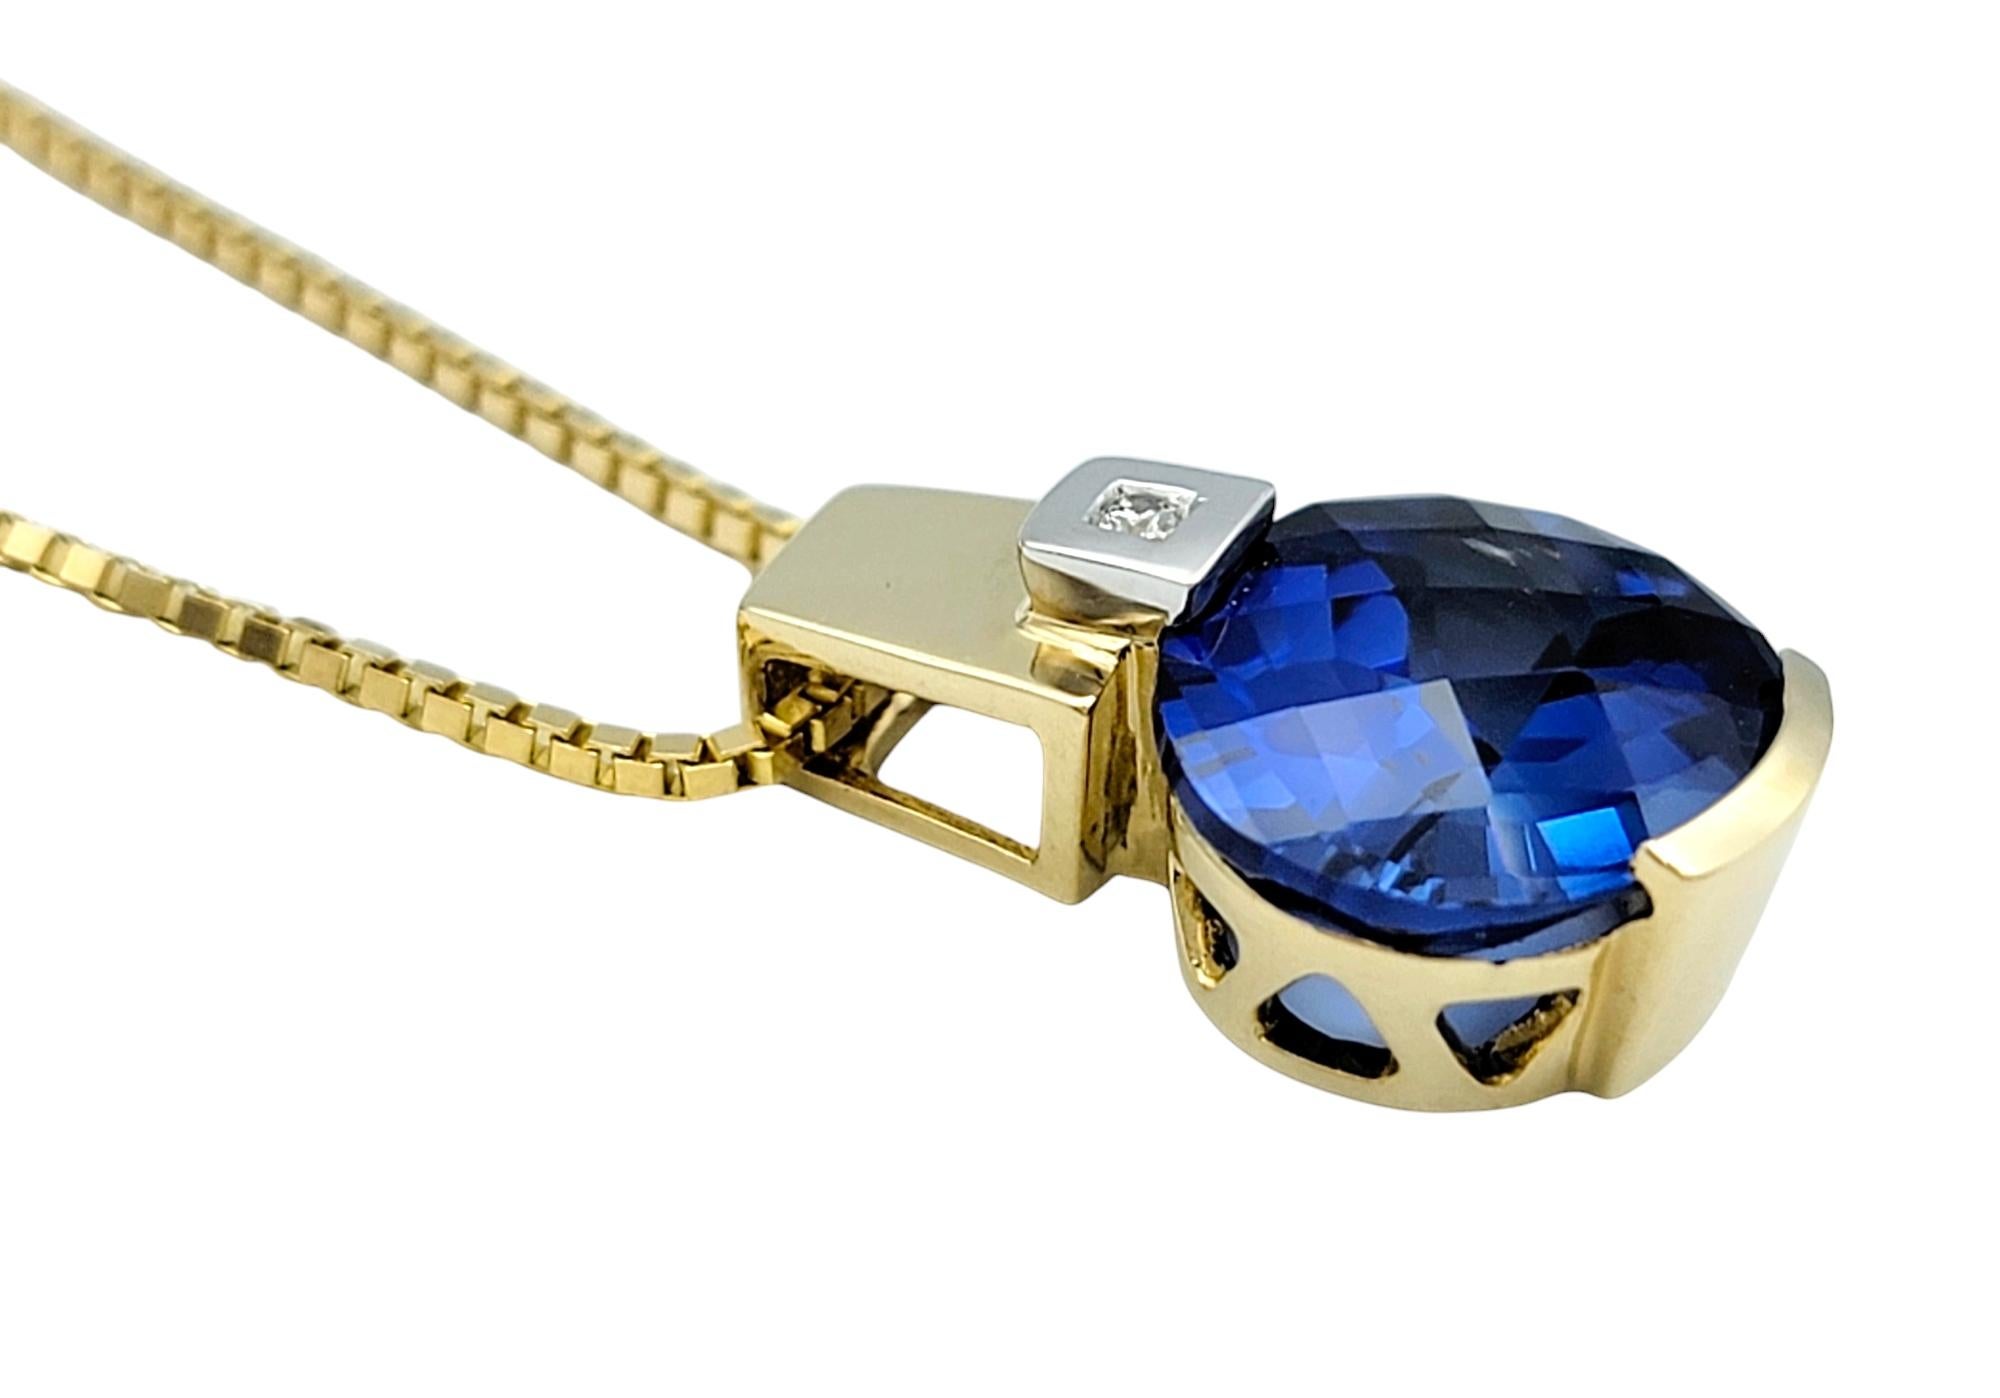 This stunning synthetic blue sapphire and natural diamond pendant is exquisitely set in 14 karat yellow and white gold. The pendant features a vibrant blue synthetic sapphire as the centerpiece, paired with a sparkling round diamond that adds